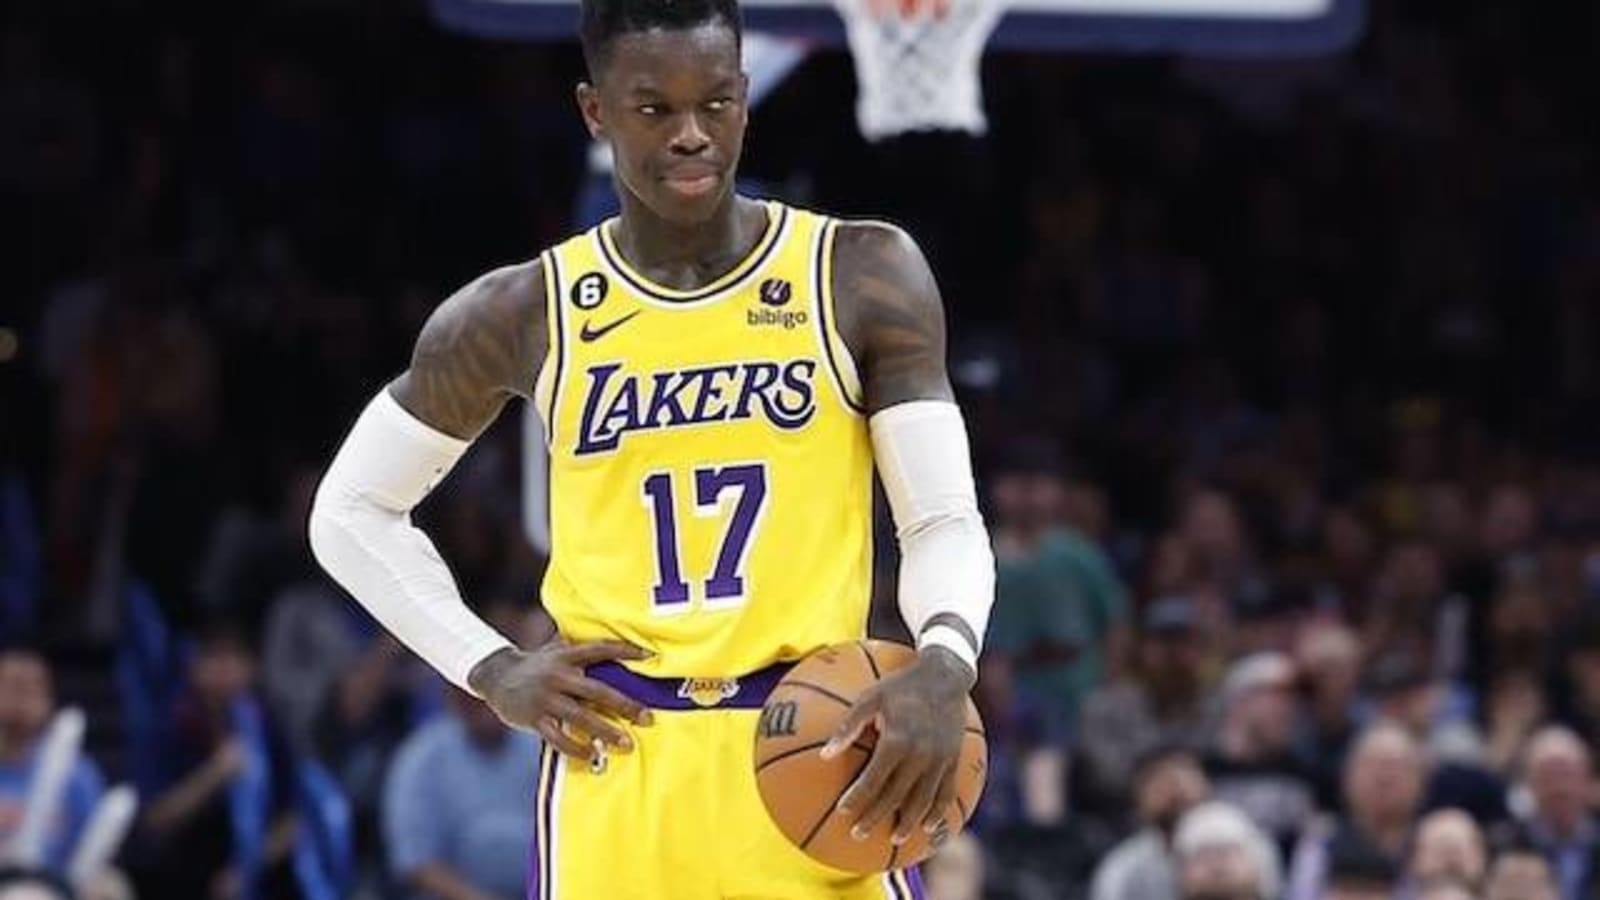 NBA Free Agency Rumors: Lakers Would Like To Re-Sign Dennis Schroder